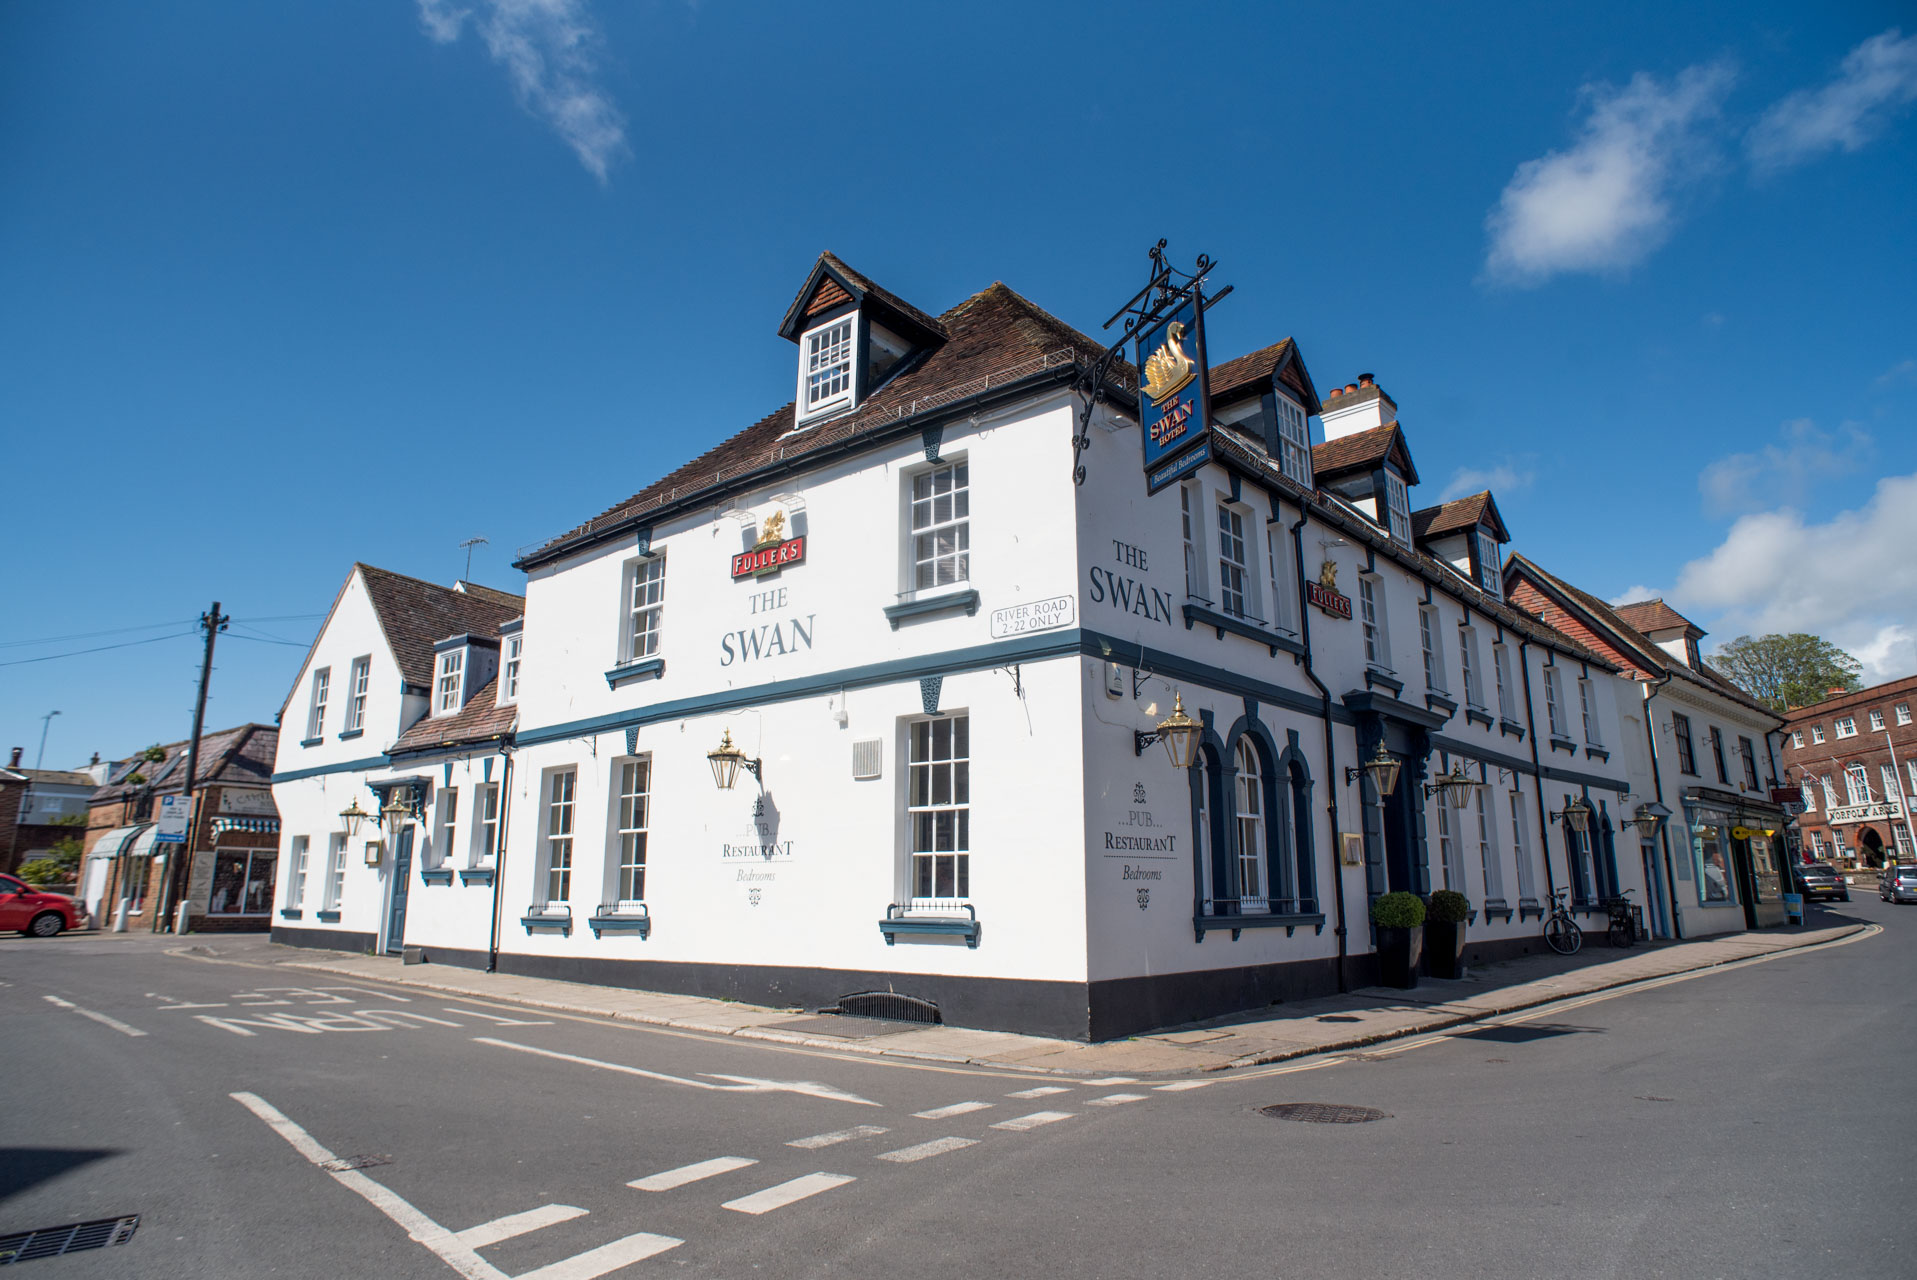 The Swan Hotel - Fuller's Pub and Hotel in Arundel